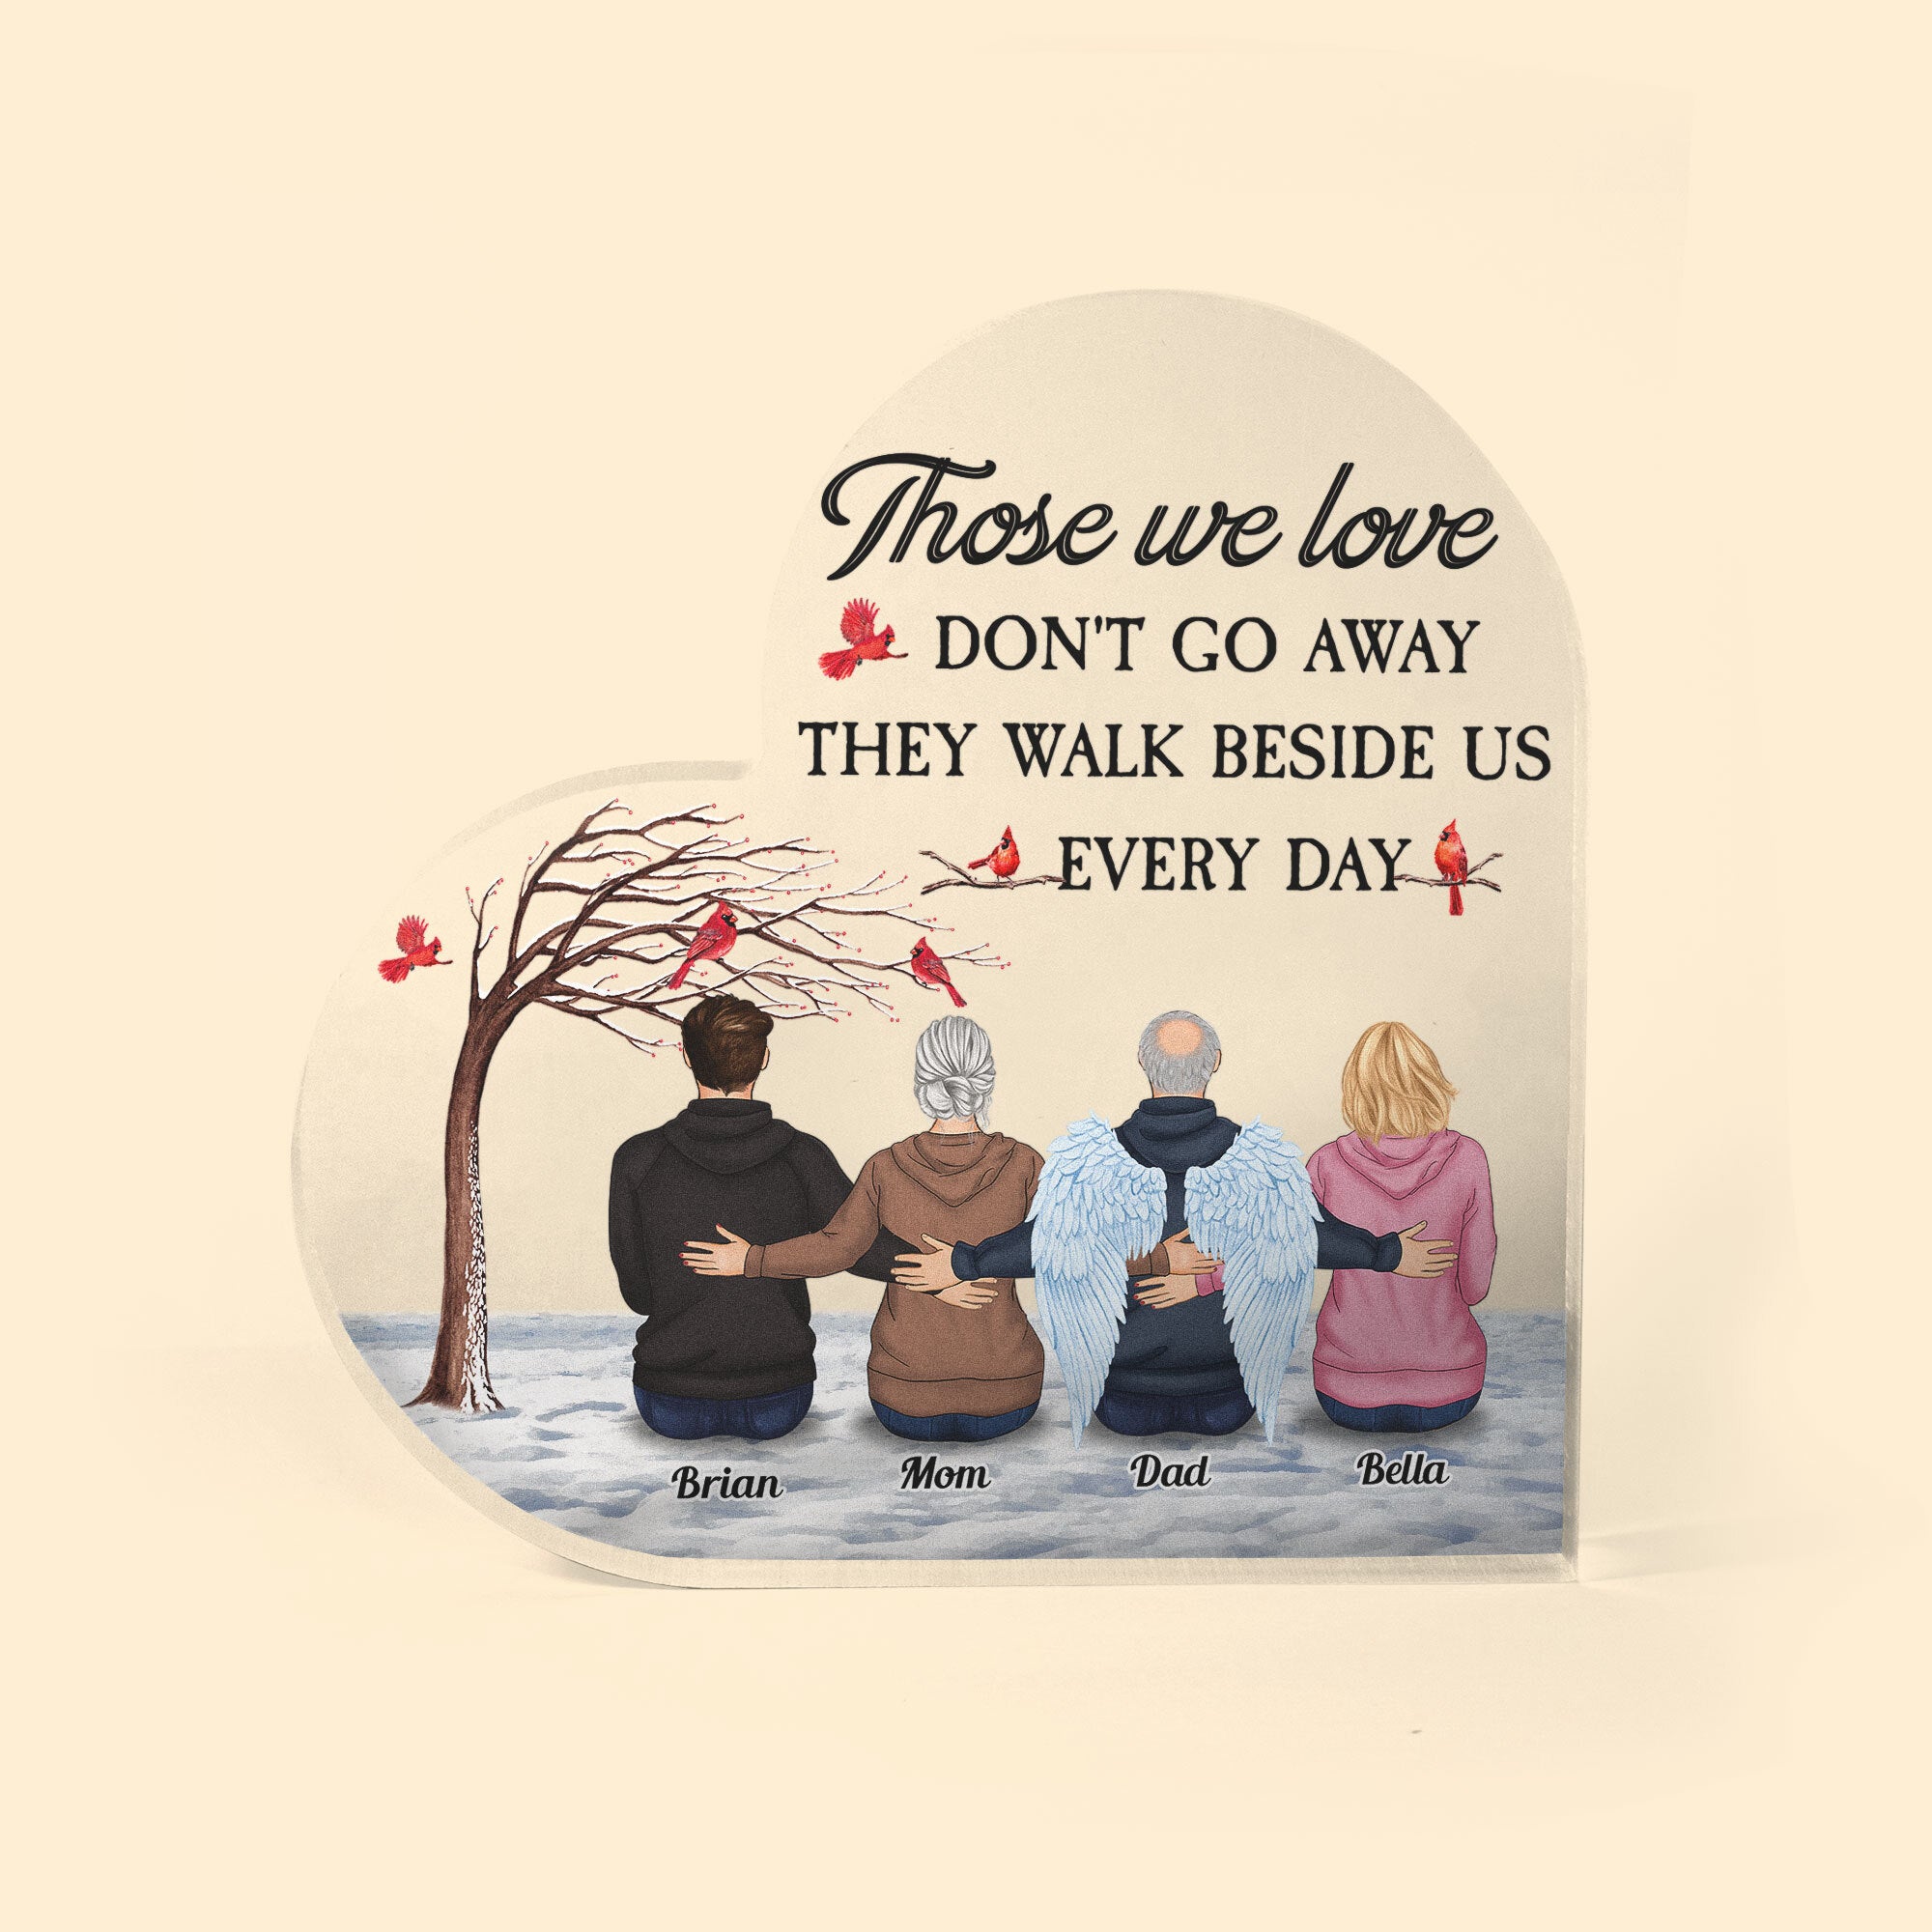 https://cdn.shopify.com/s/files/1/0499/6379/4592/products/Those-We-Love-Dont-Go-Away-Personalized-Heart-Shaped-Acrylic-Plaque-Memorial-Gift-For-Loss-Of-Family-Members_-Mom_-Dad_-Grief-Gift.jpg?v=1647924294